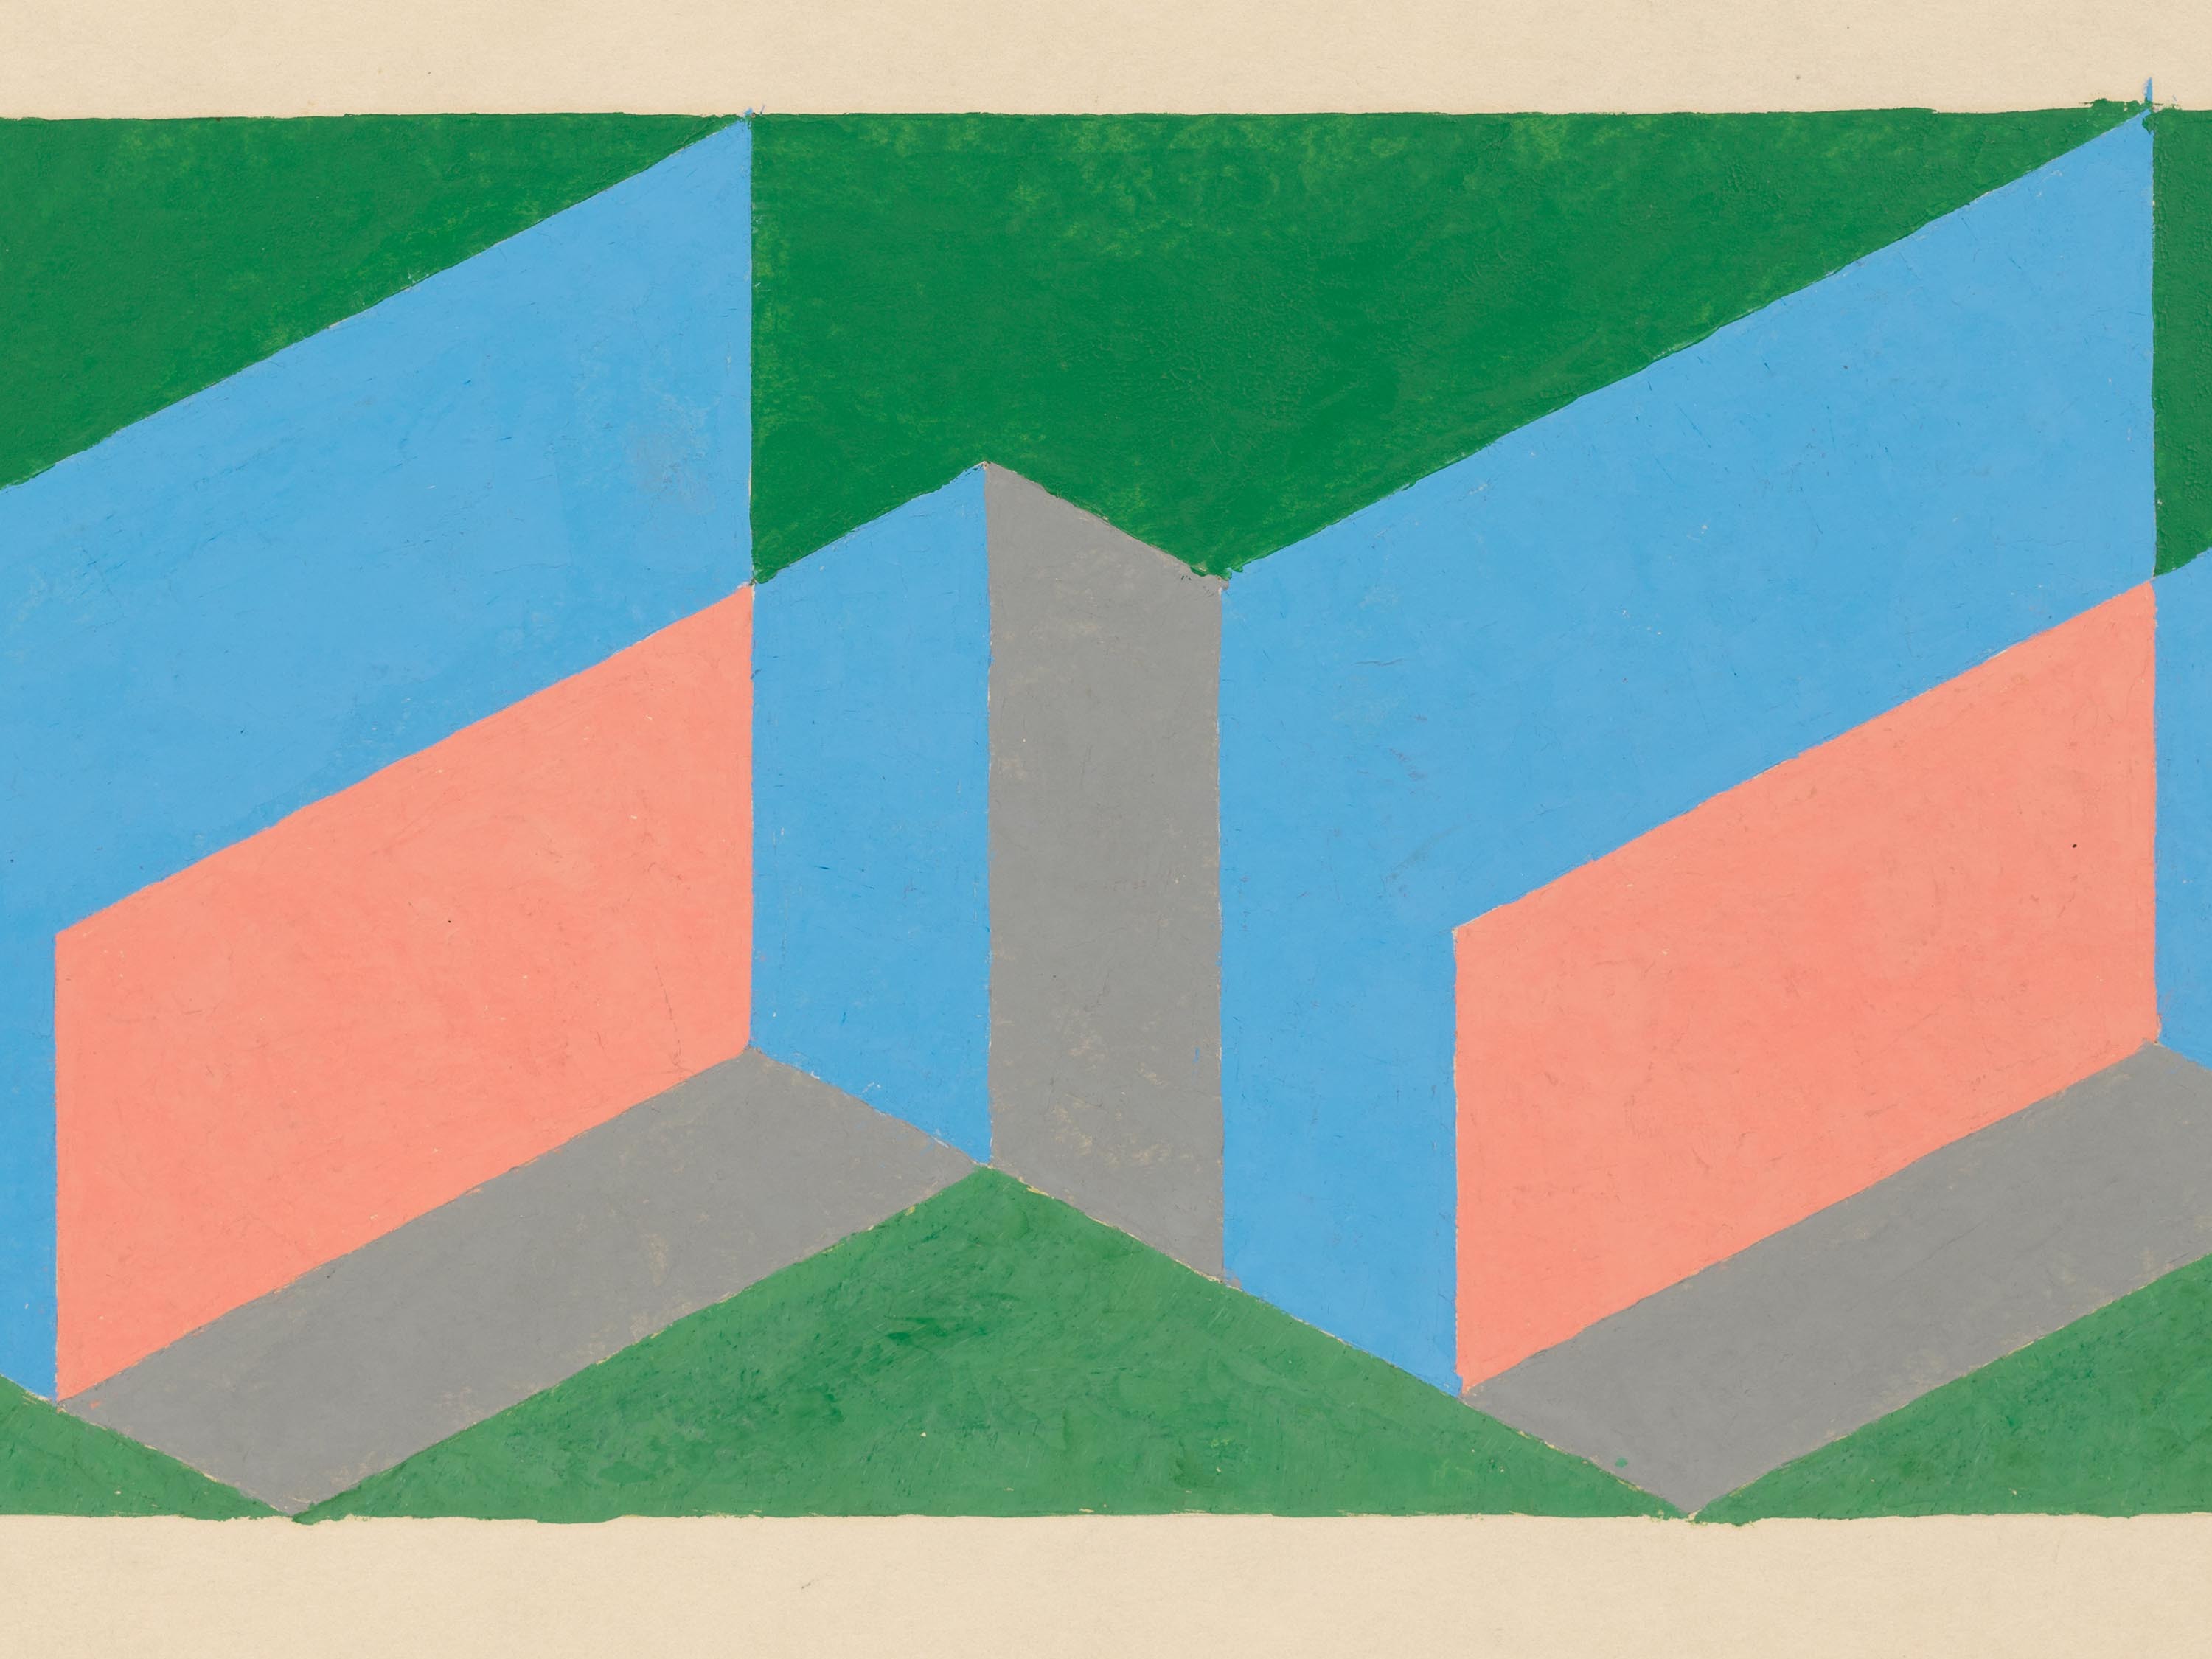 A detail from the work titled Study for Tautonym by Josef Albers, dated 1944